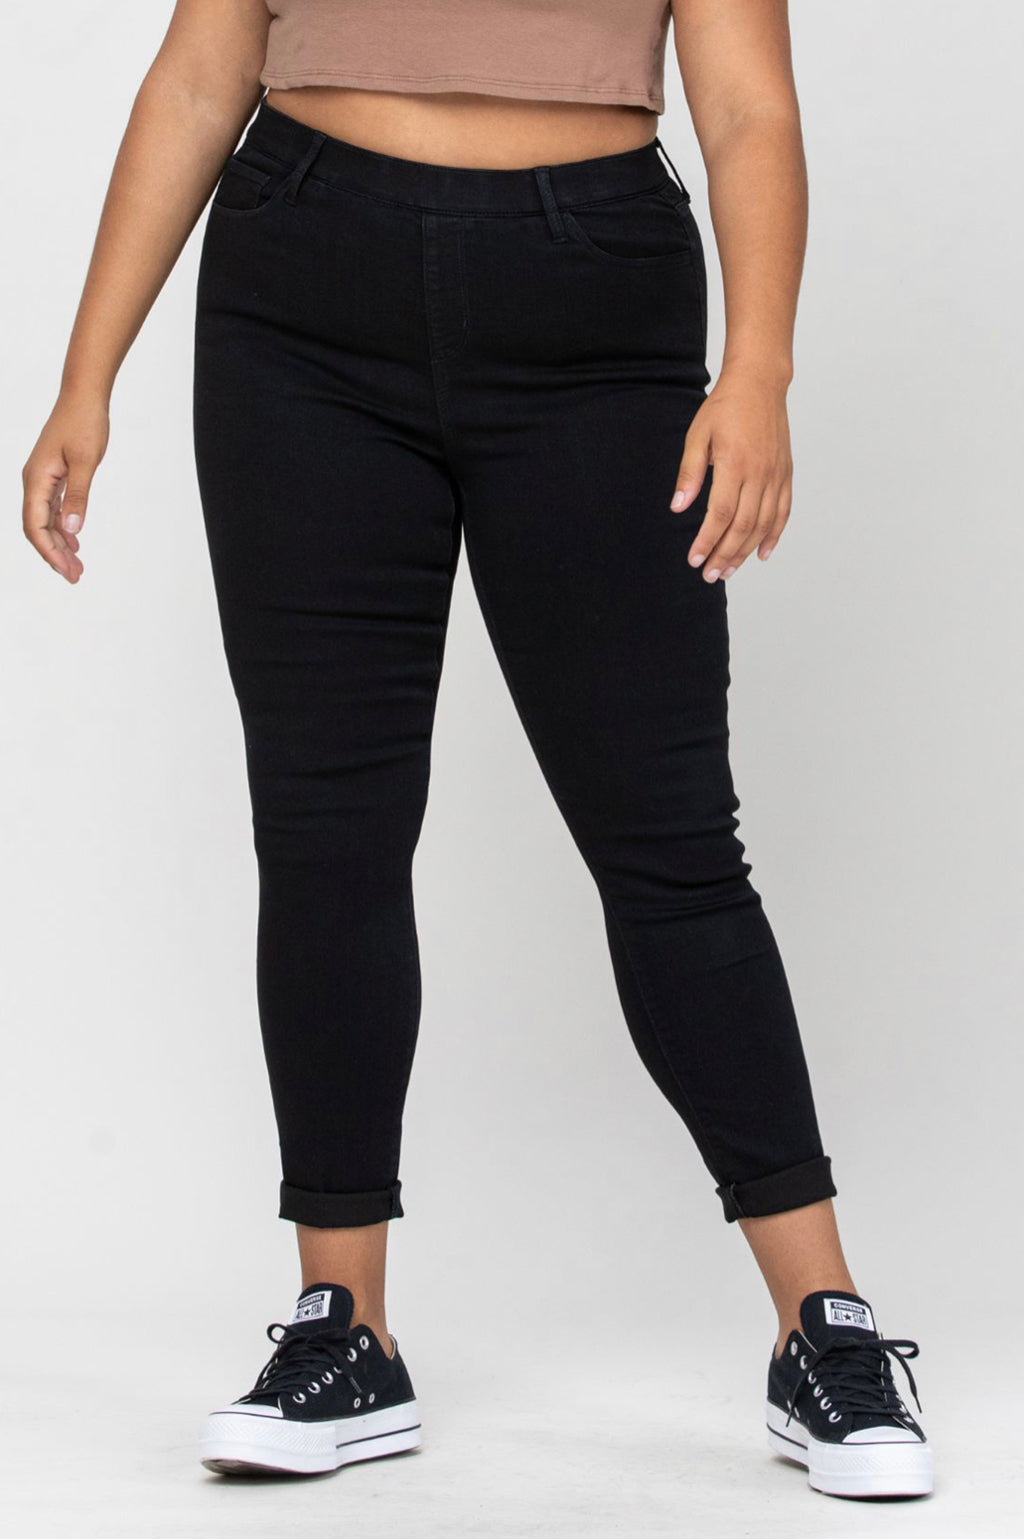 Black Mid Rise Pull On Crop Skinny Jeans by Cello - Plus